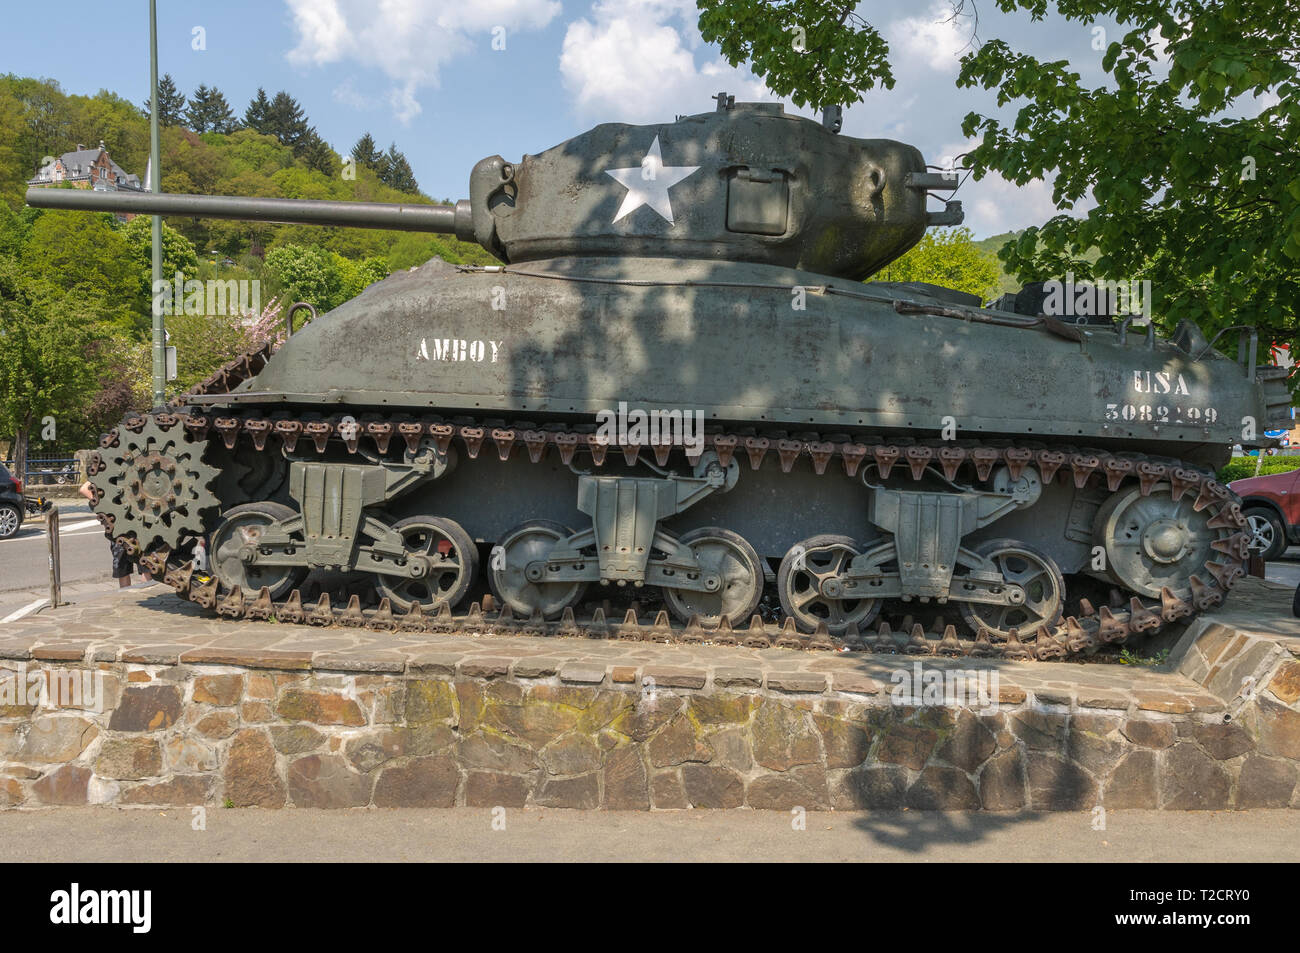 LA ROCHE-EN-ARDENNE, BELGIUM - APRIL 23, 2011:  The Sherman tank M4A1 of the USA army stands in La Roche-en-Ardenne as a memorial of the Ardennes offe Stock Photo